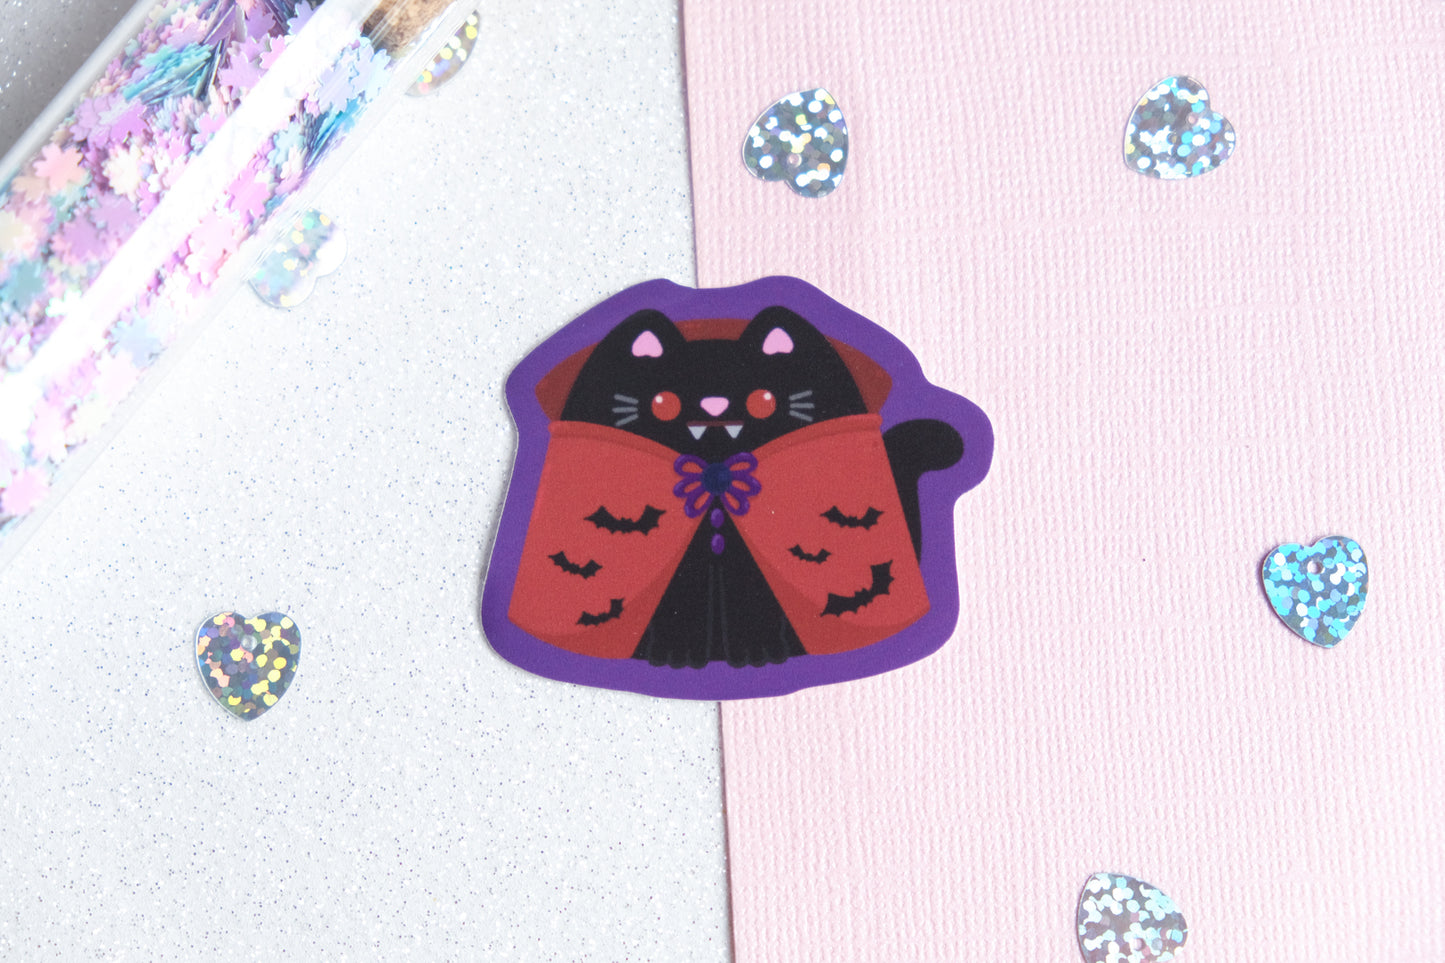 Autocollant chat vampire Dracucat - Collection Whiskered Wonders